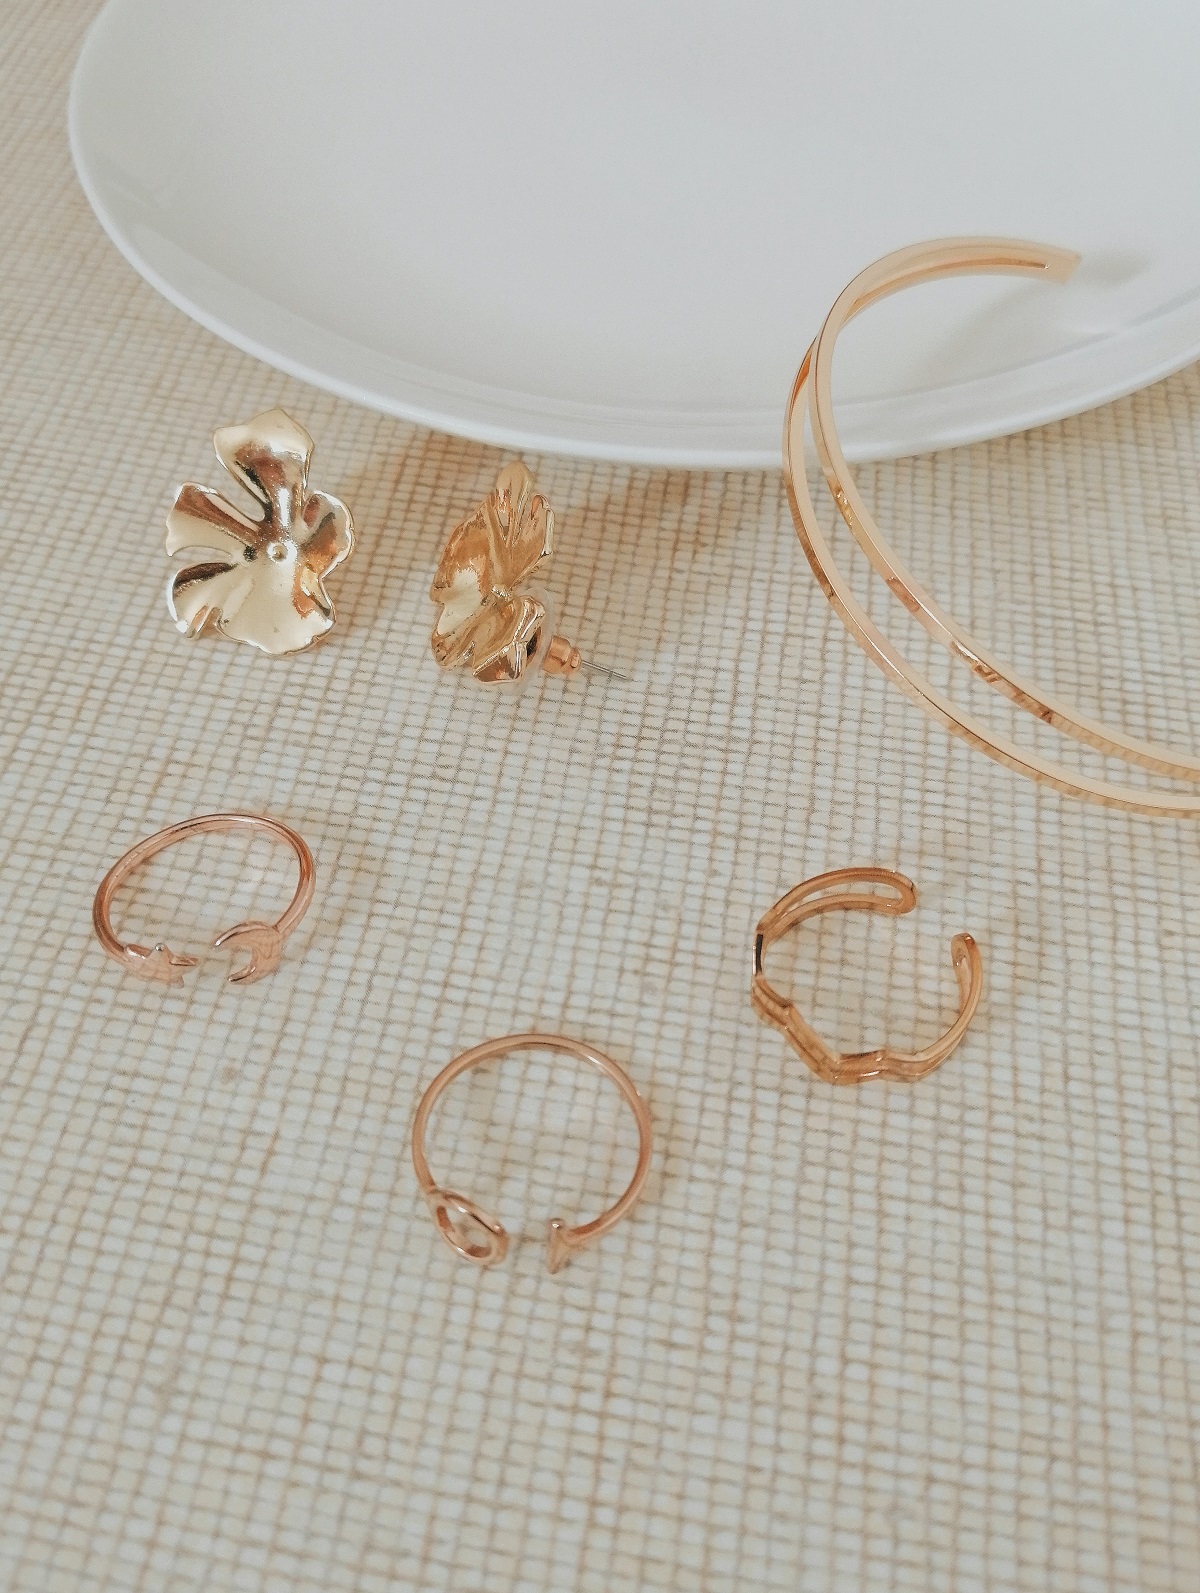 A pair of flower earrings, a bracelet, and 3 gold rings on a jewelry dish with white background